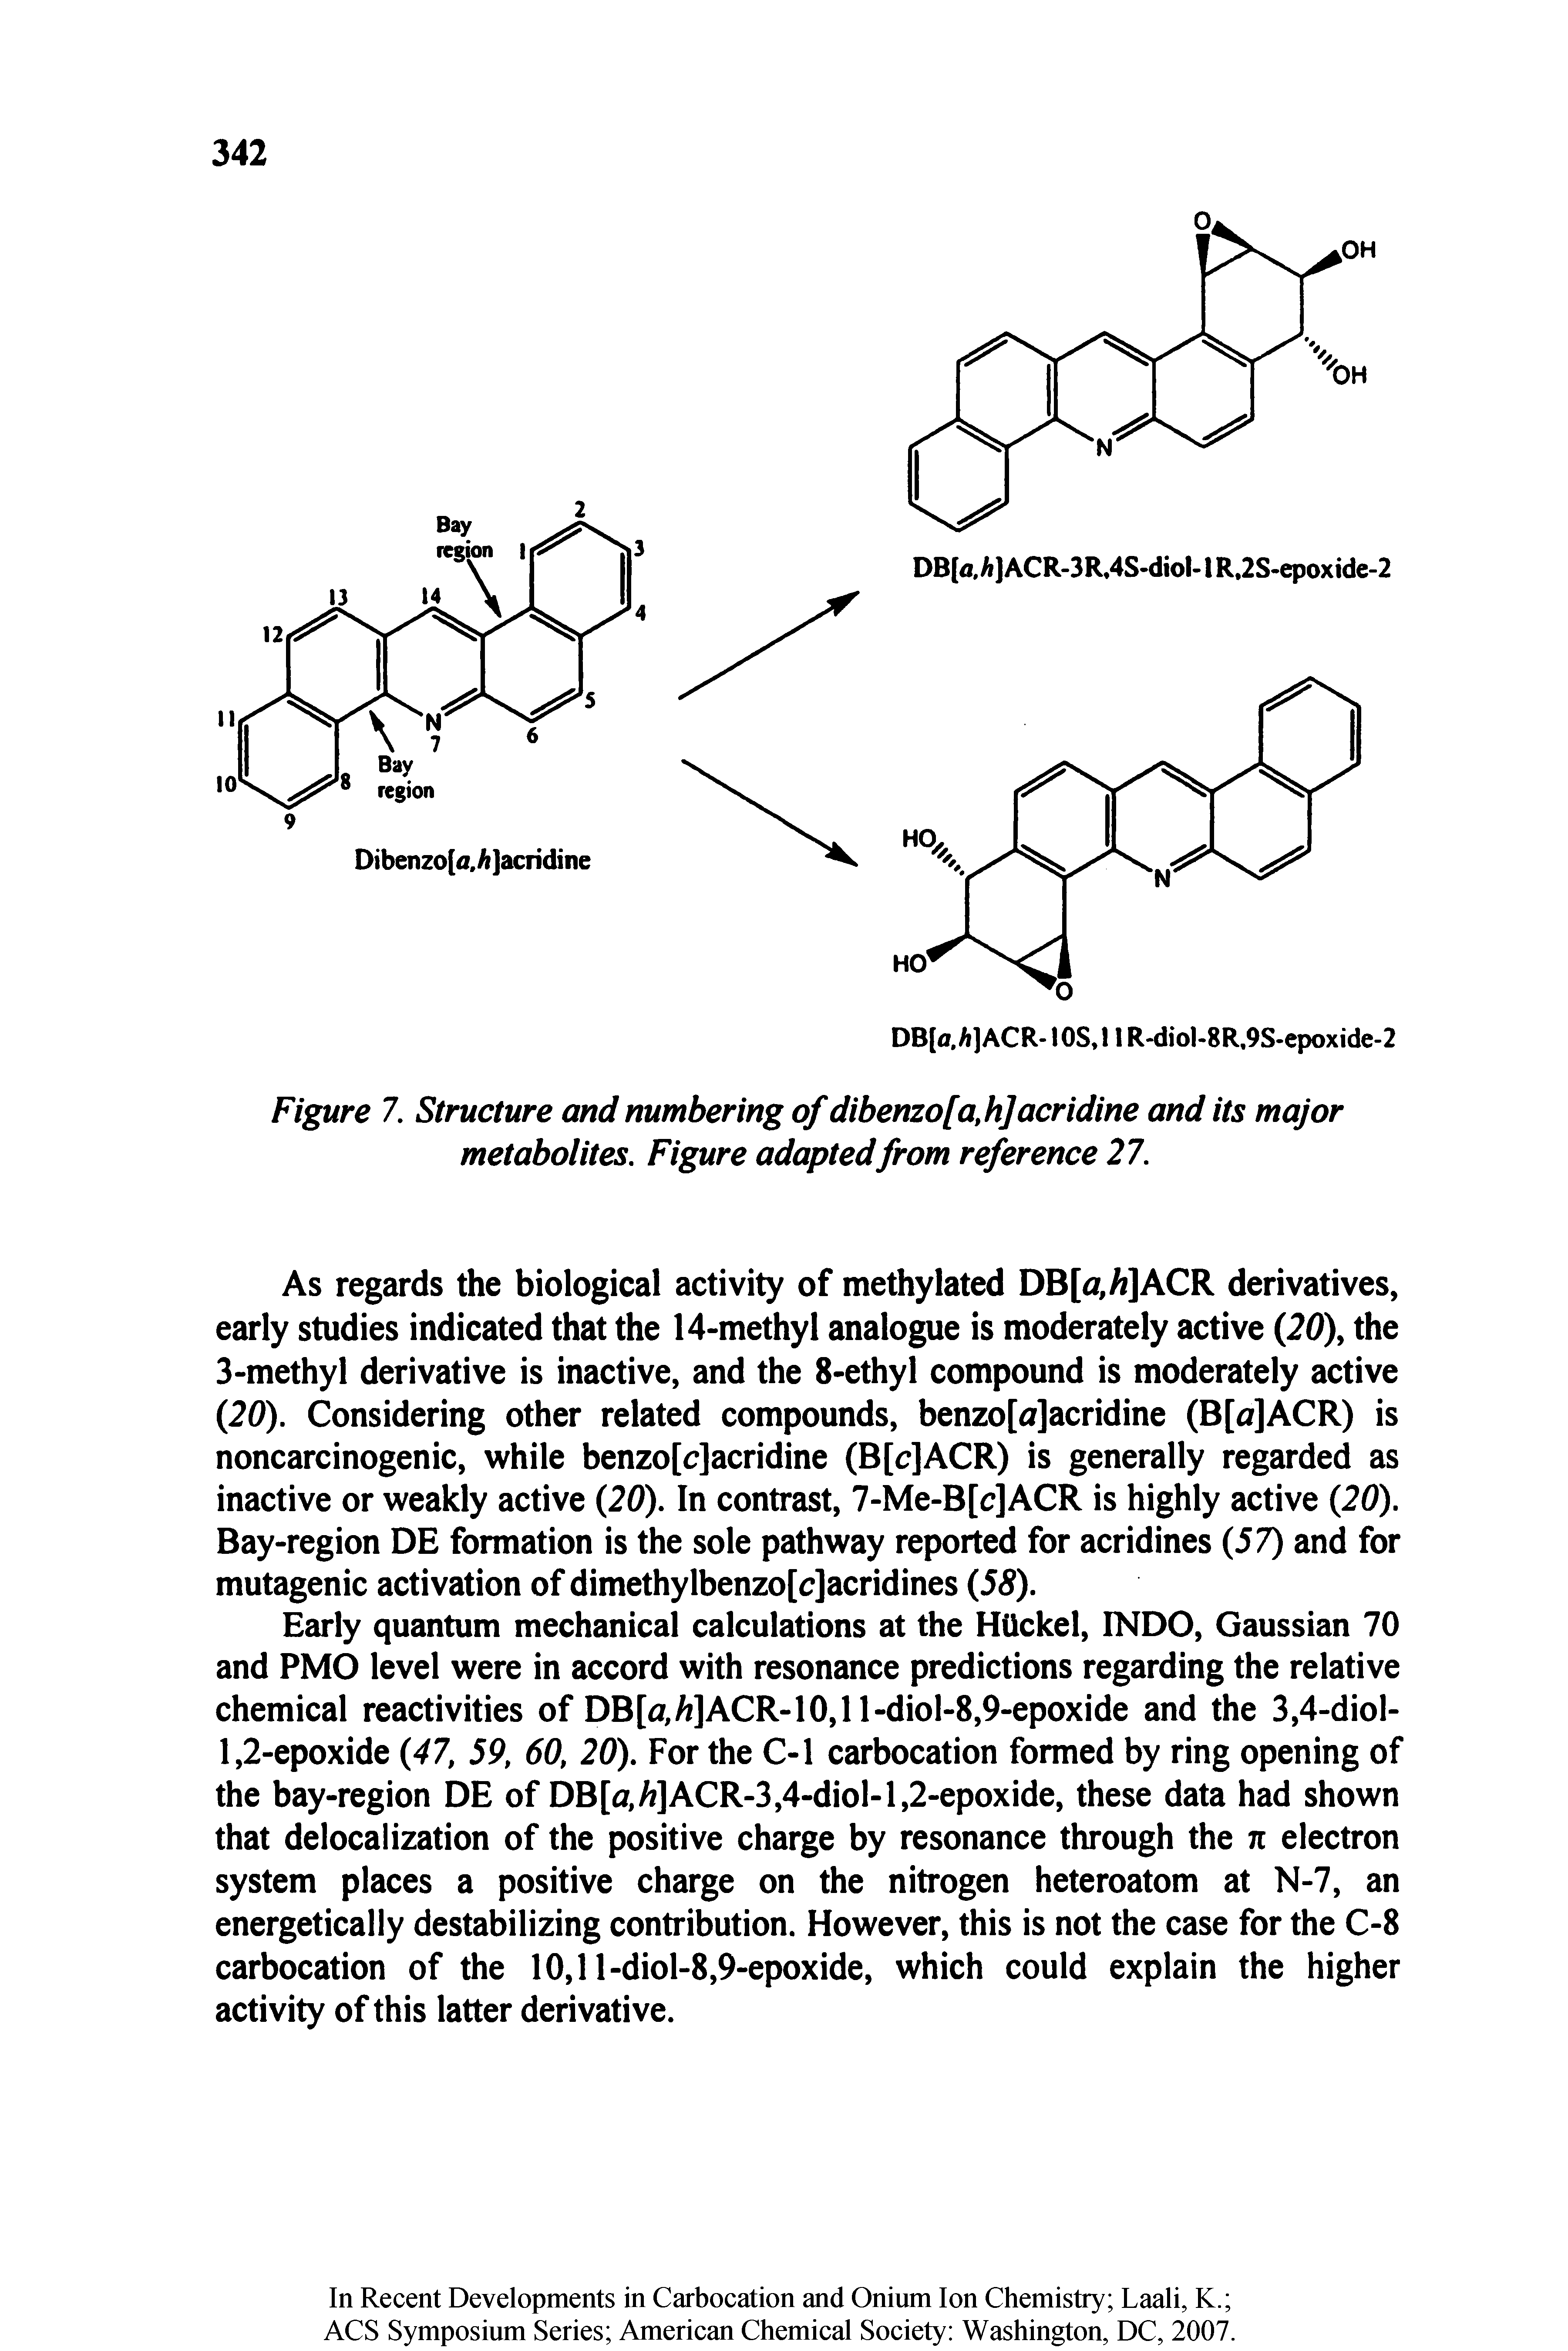 Figure 7. Structure and numbering of dibenzo[a,h]acridine and its major metabolites. Figure adaptedfrom reference 27.